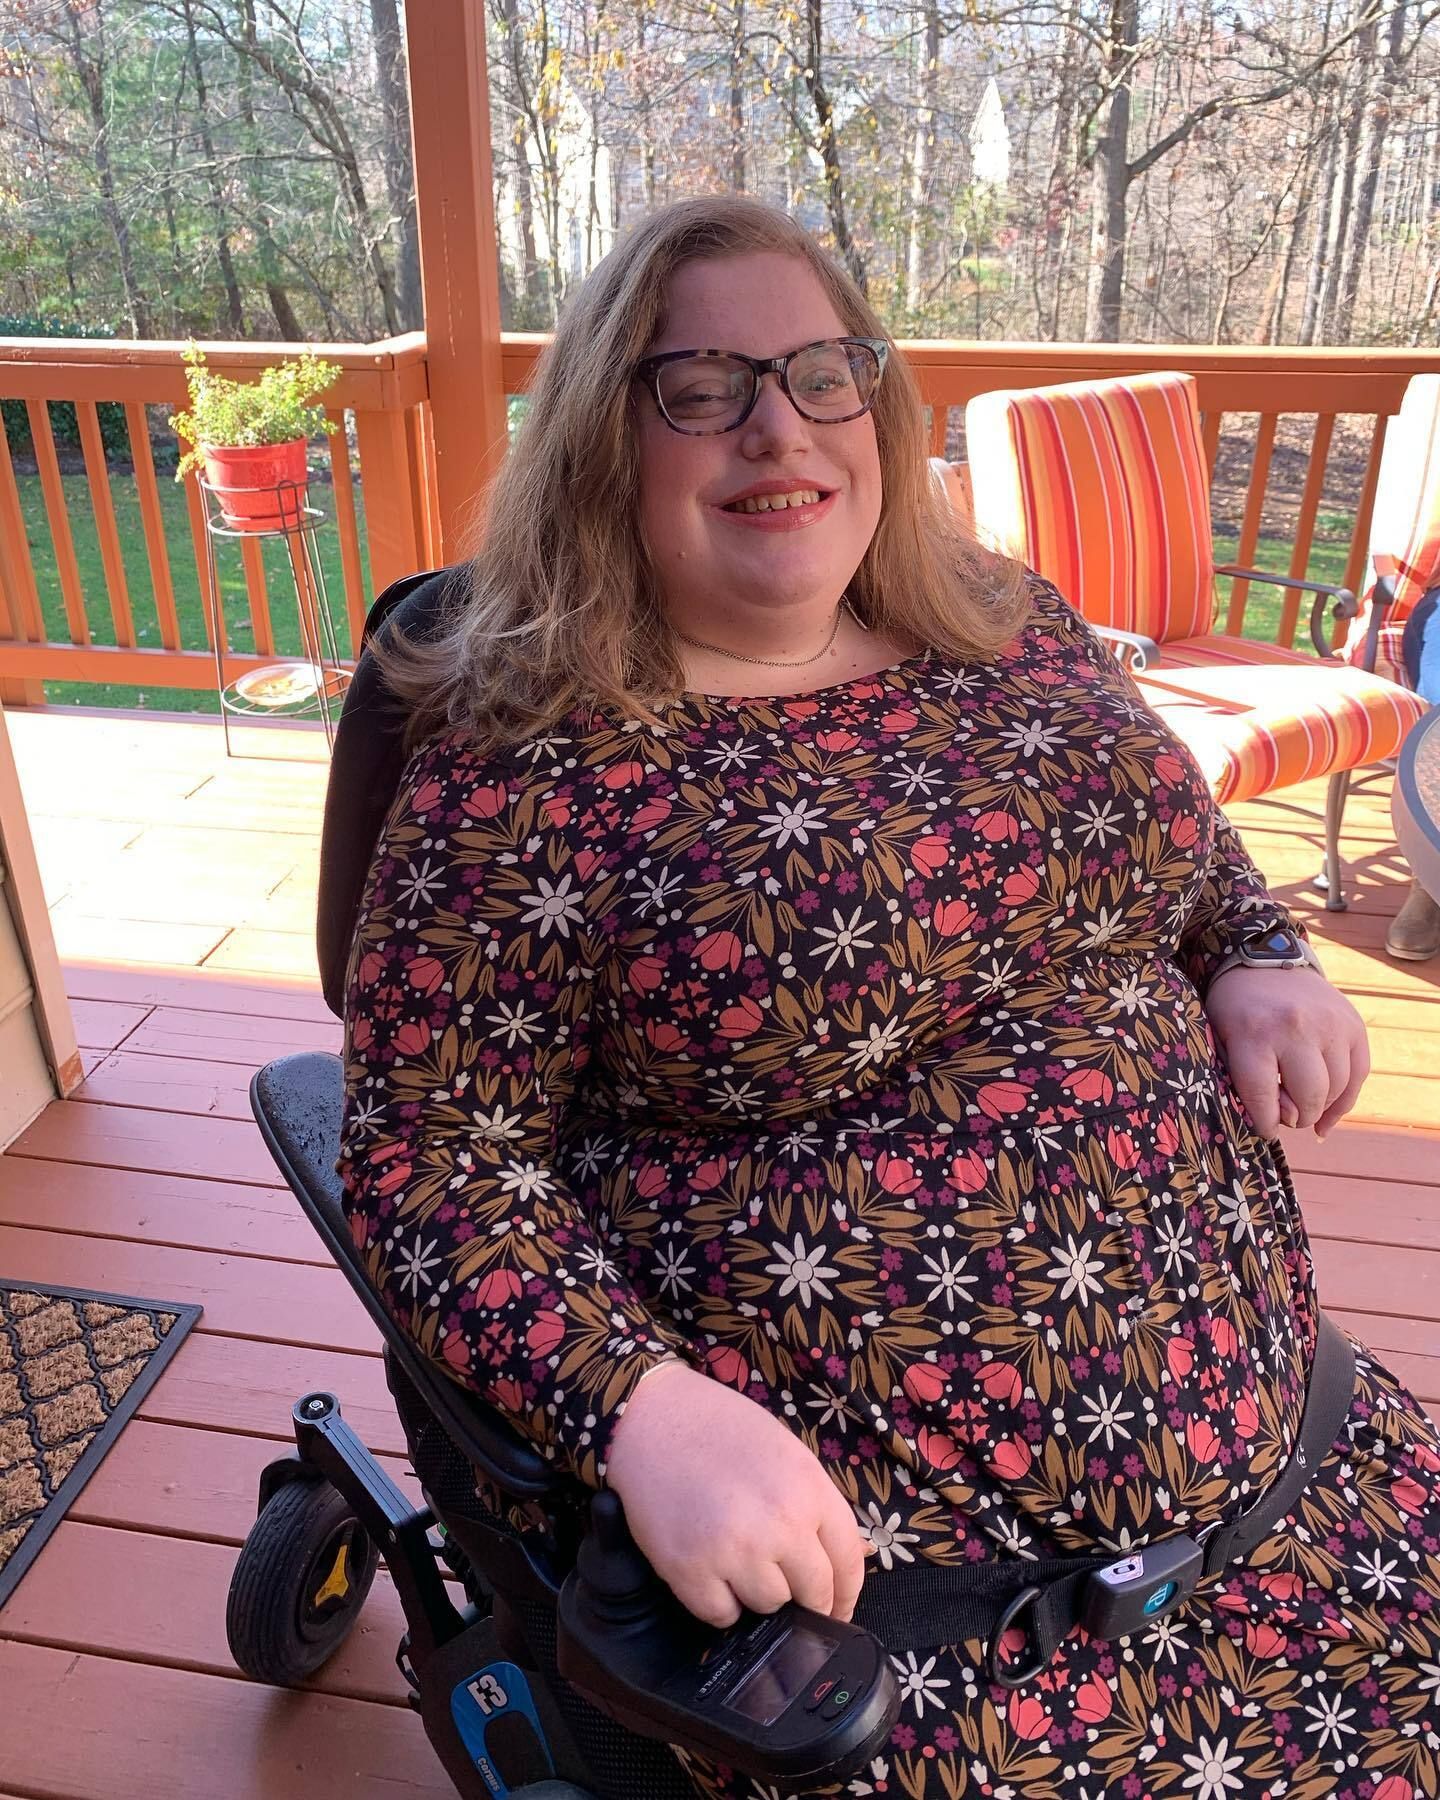 I'm obese and disabled. A healthy lifestyle is inaccessible to